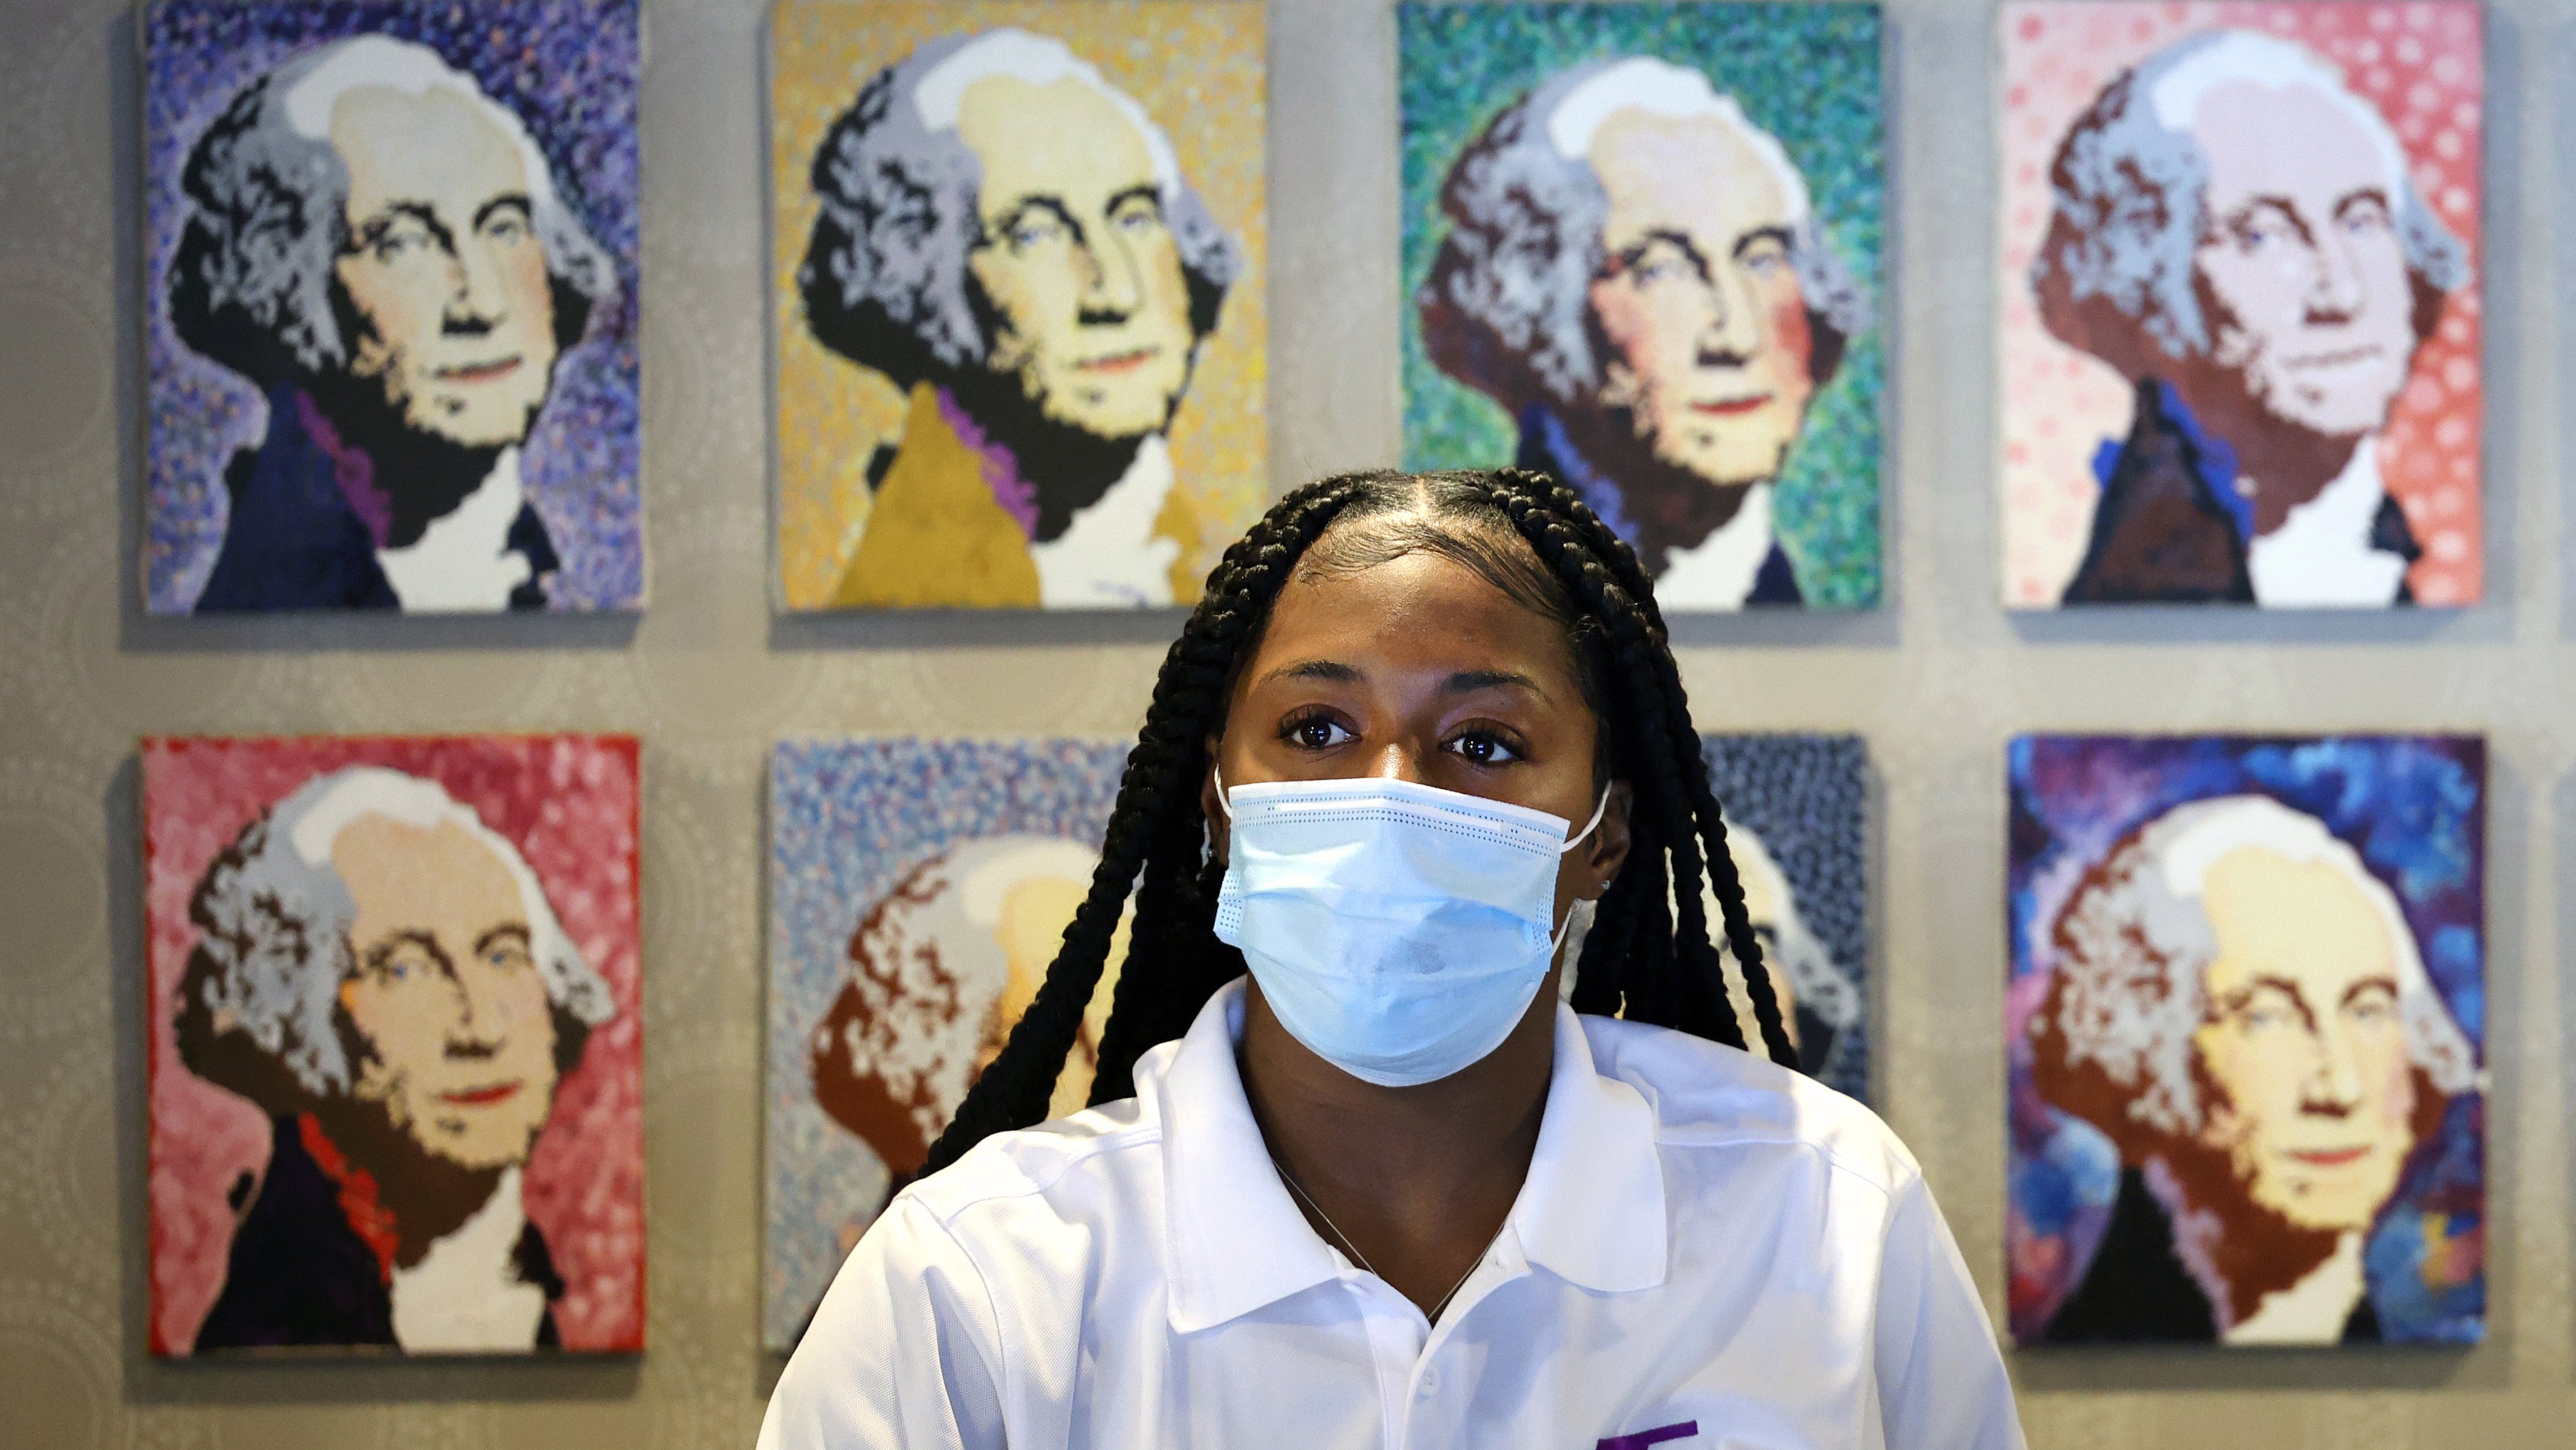 Washington, DC To Require Indoor Masks After Updated CDC Recommendations